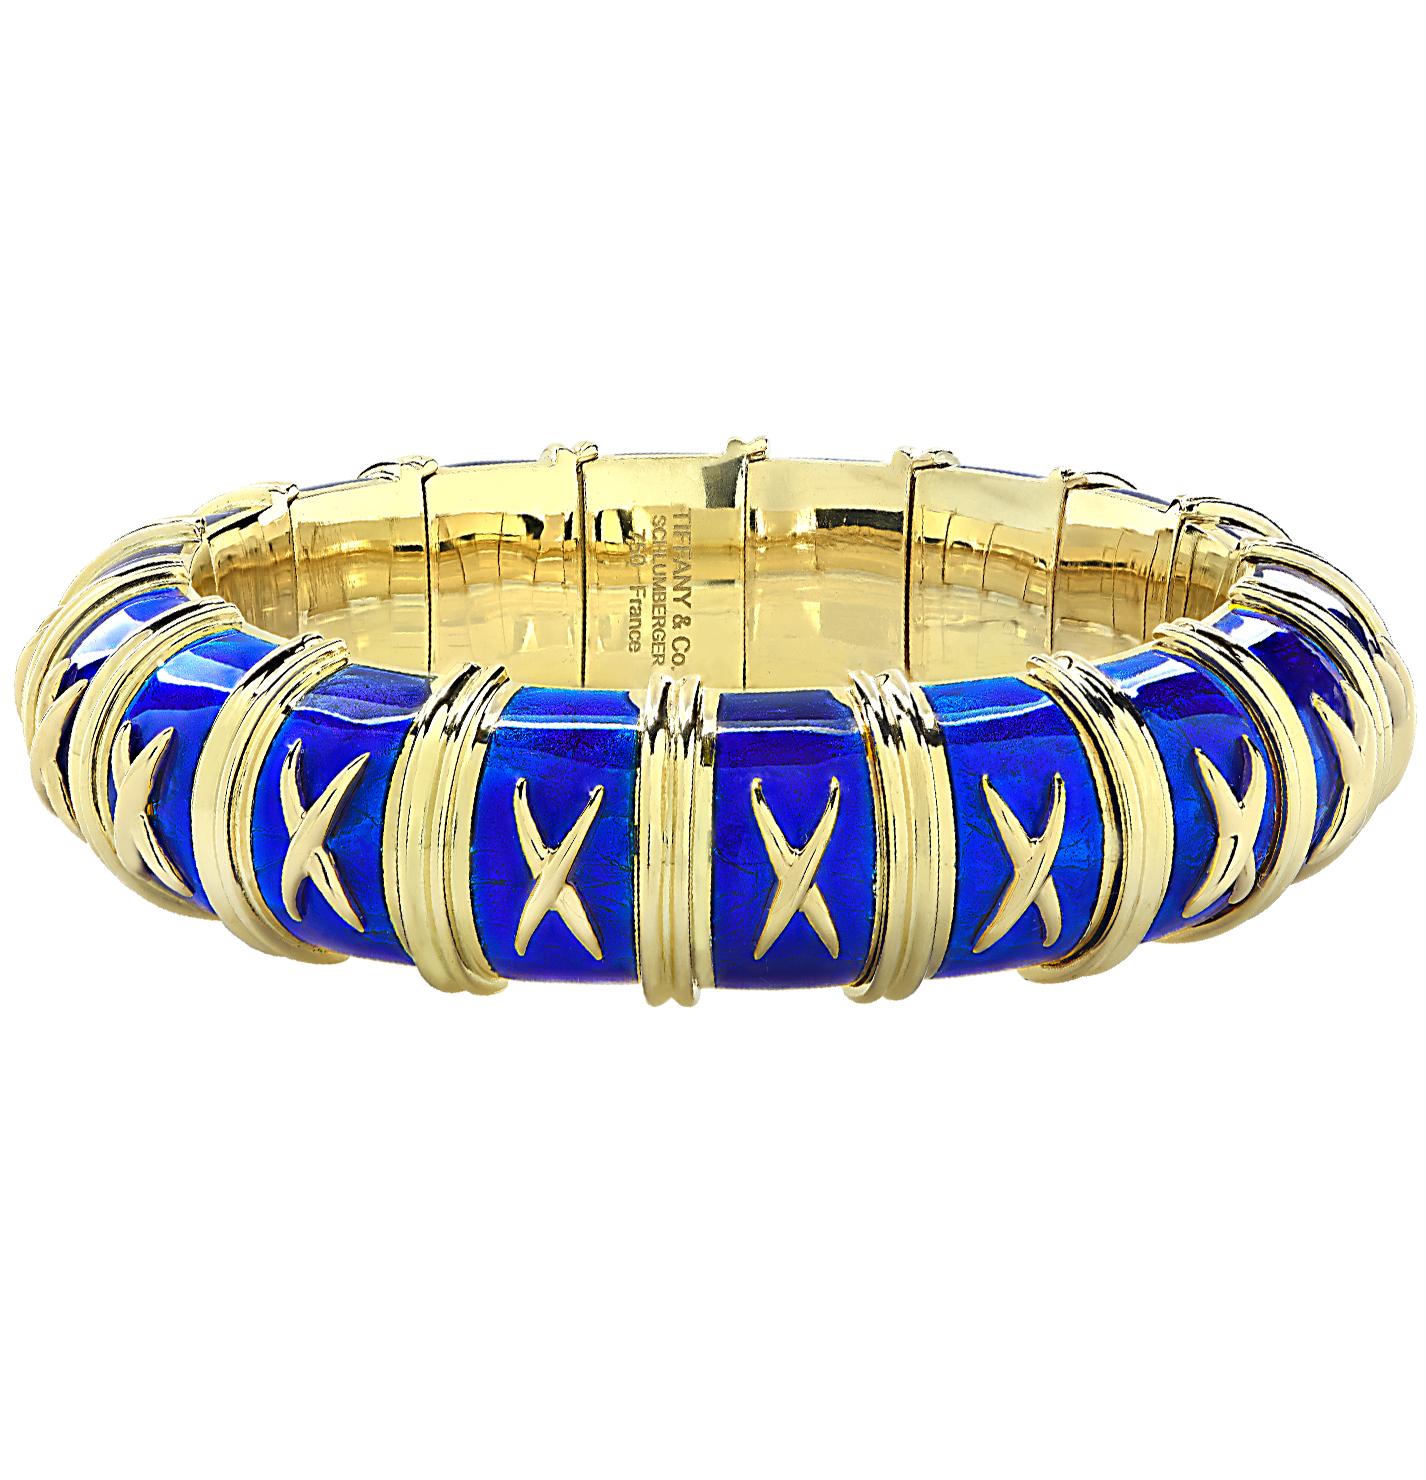 Stunning Tiffany And Co Schlumberger bangle from the crossillion collection, crafted in 18k yellow gold and enriched with Vibrant royal blue enamel, accented with gold X’s and double piped borders surrounding the entire bracelet. The bracelet